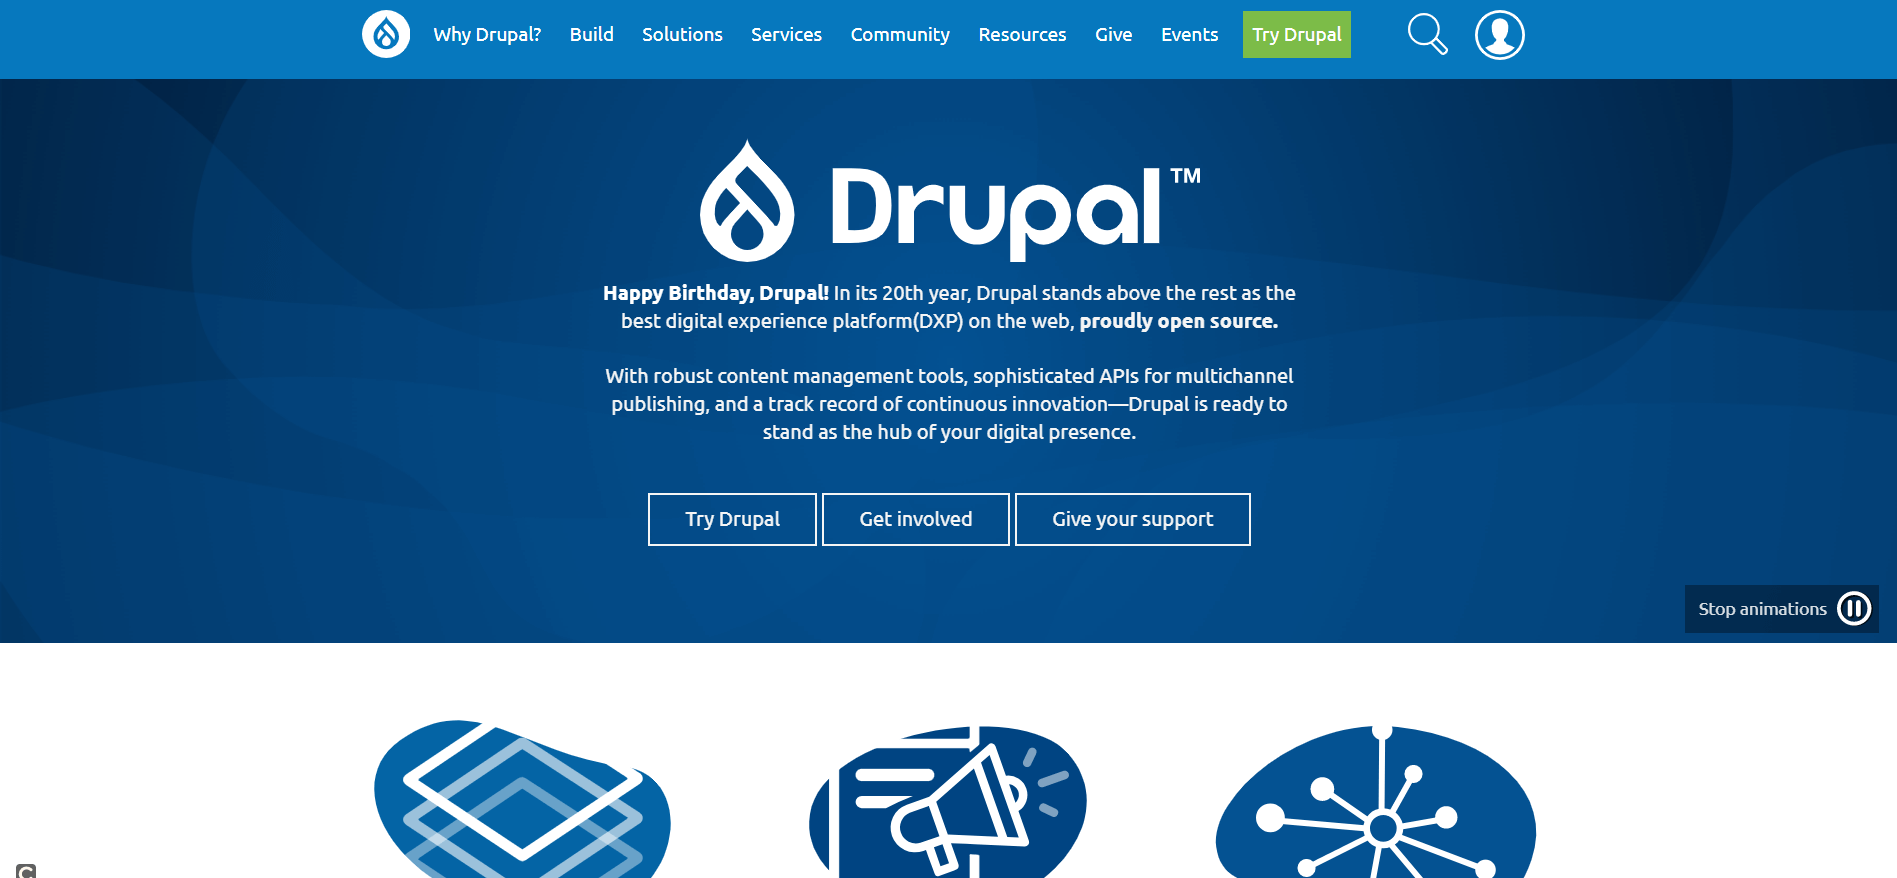 The homepage of the Drupal project